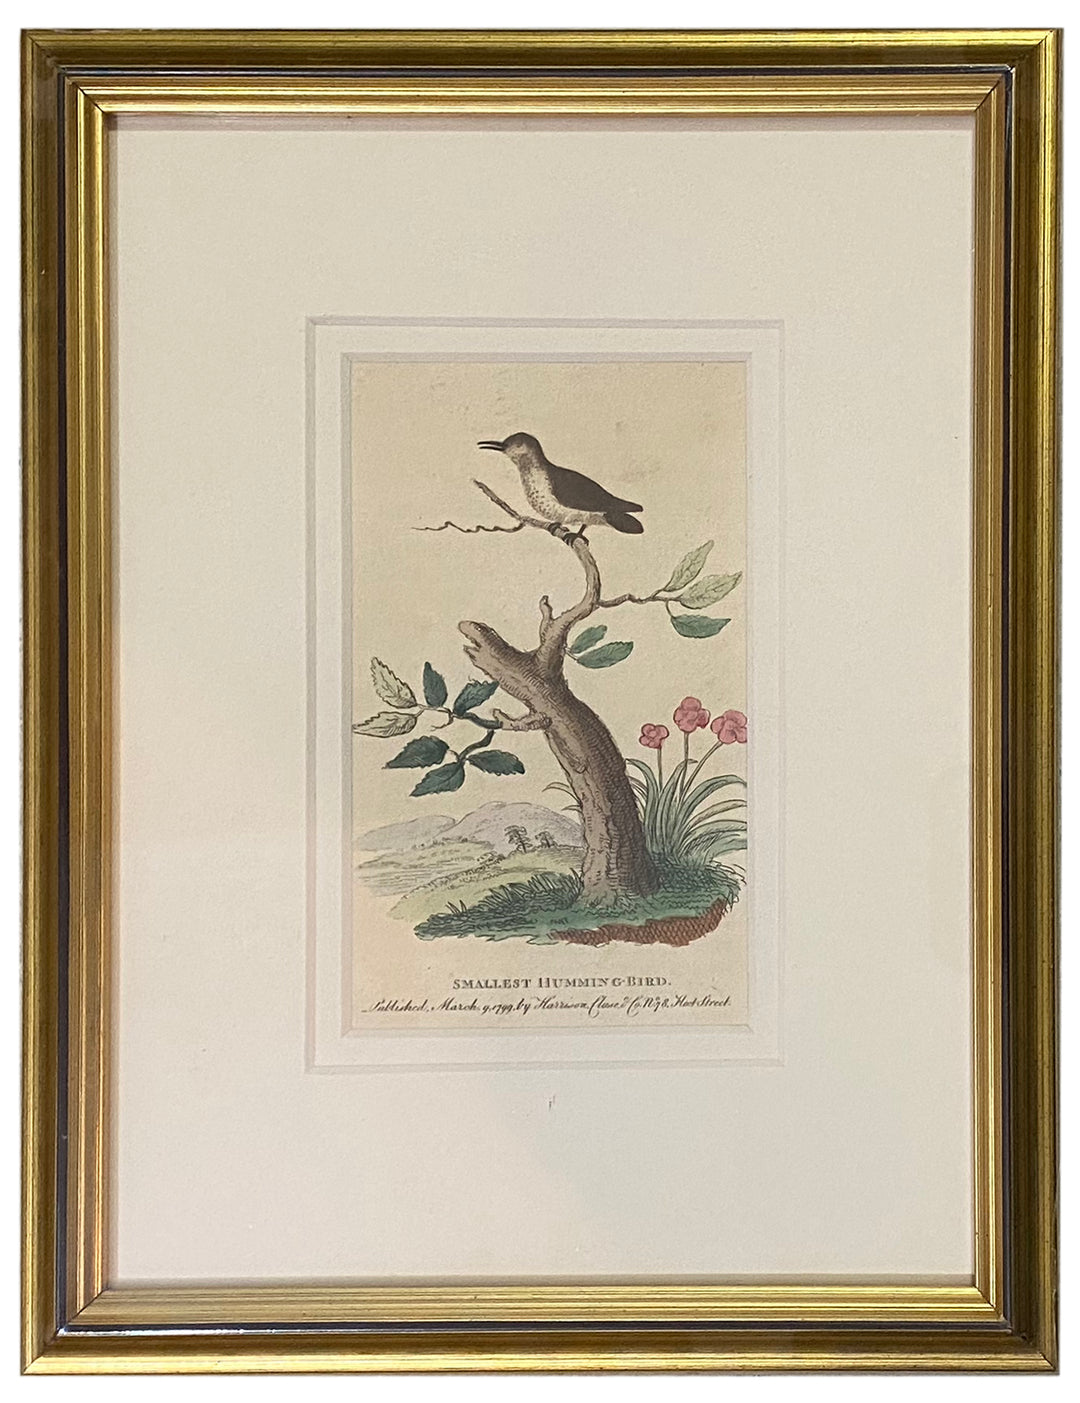 Early 19th Century Engraving - Birds